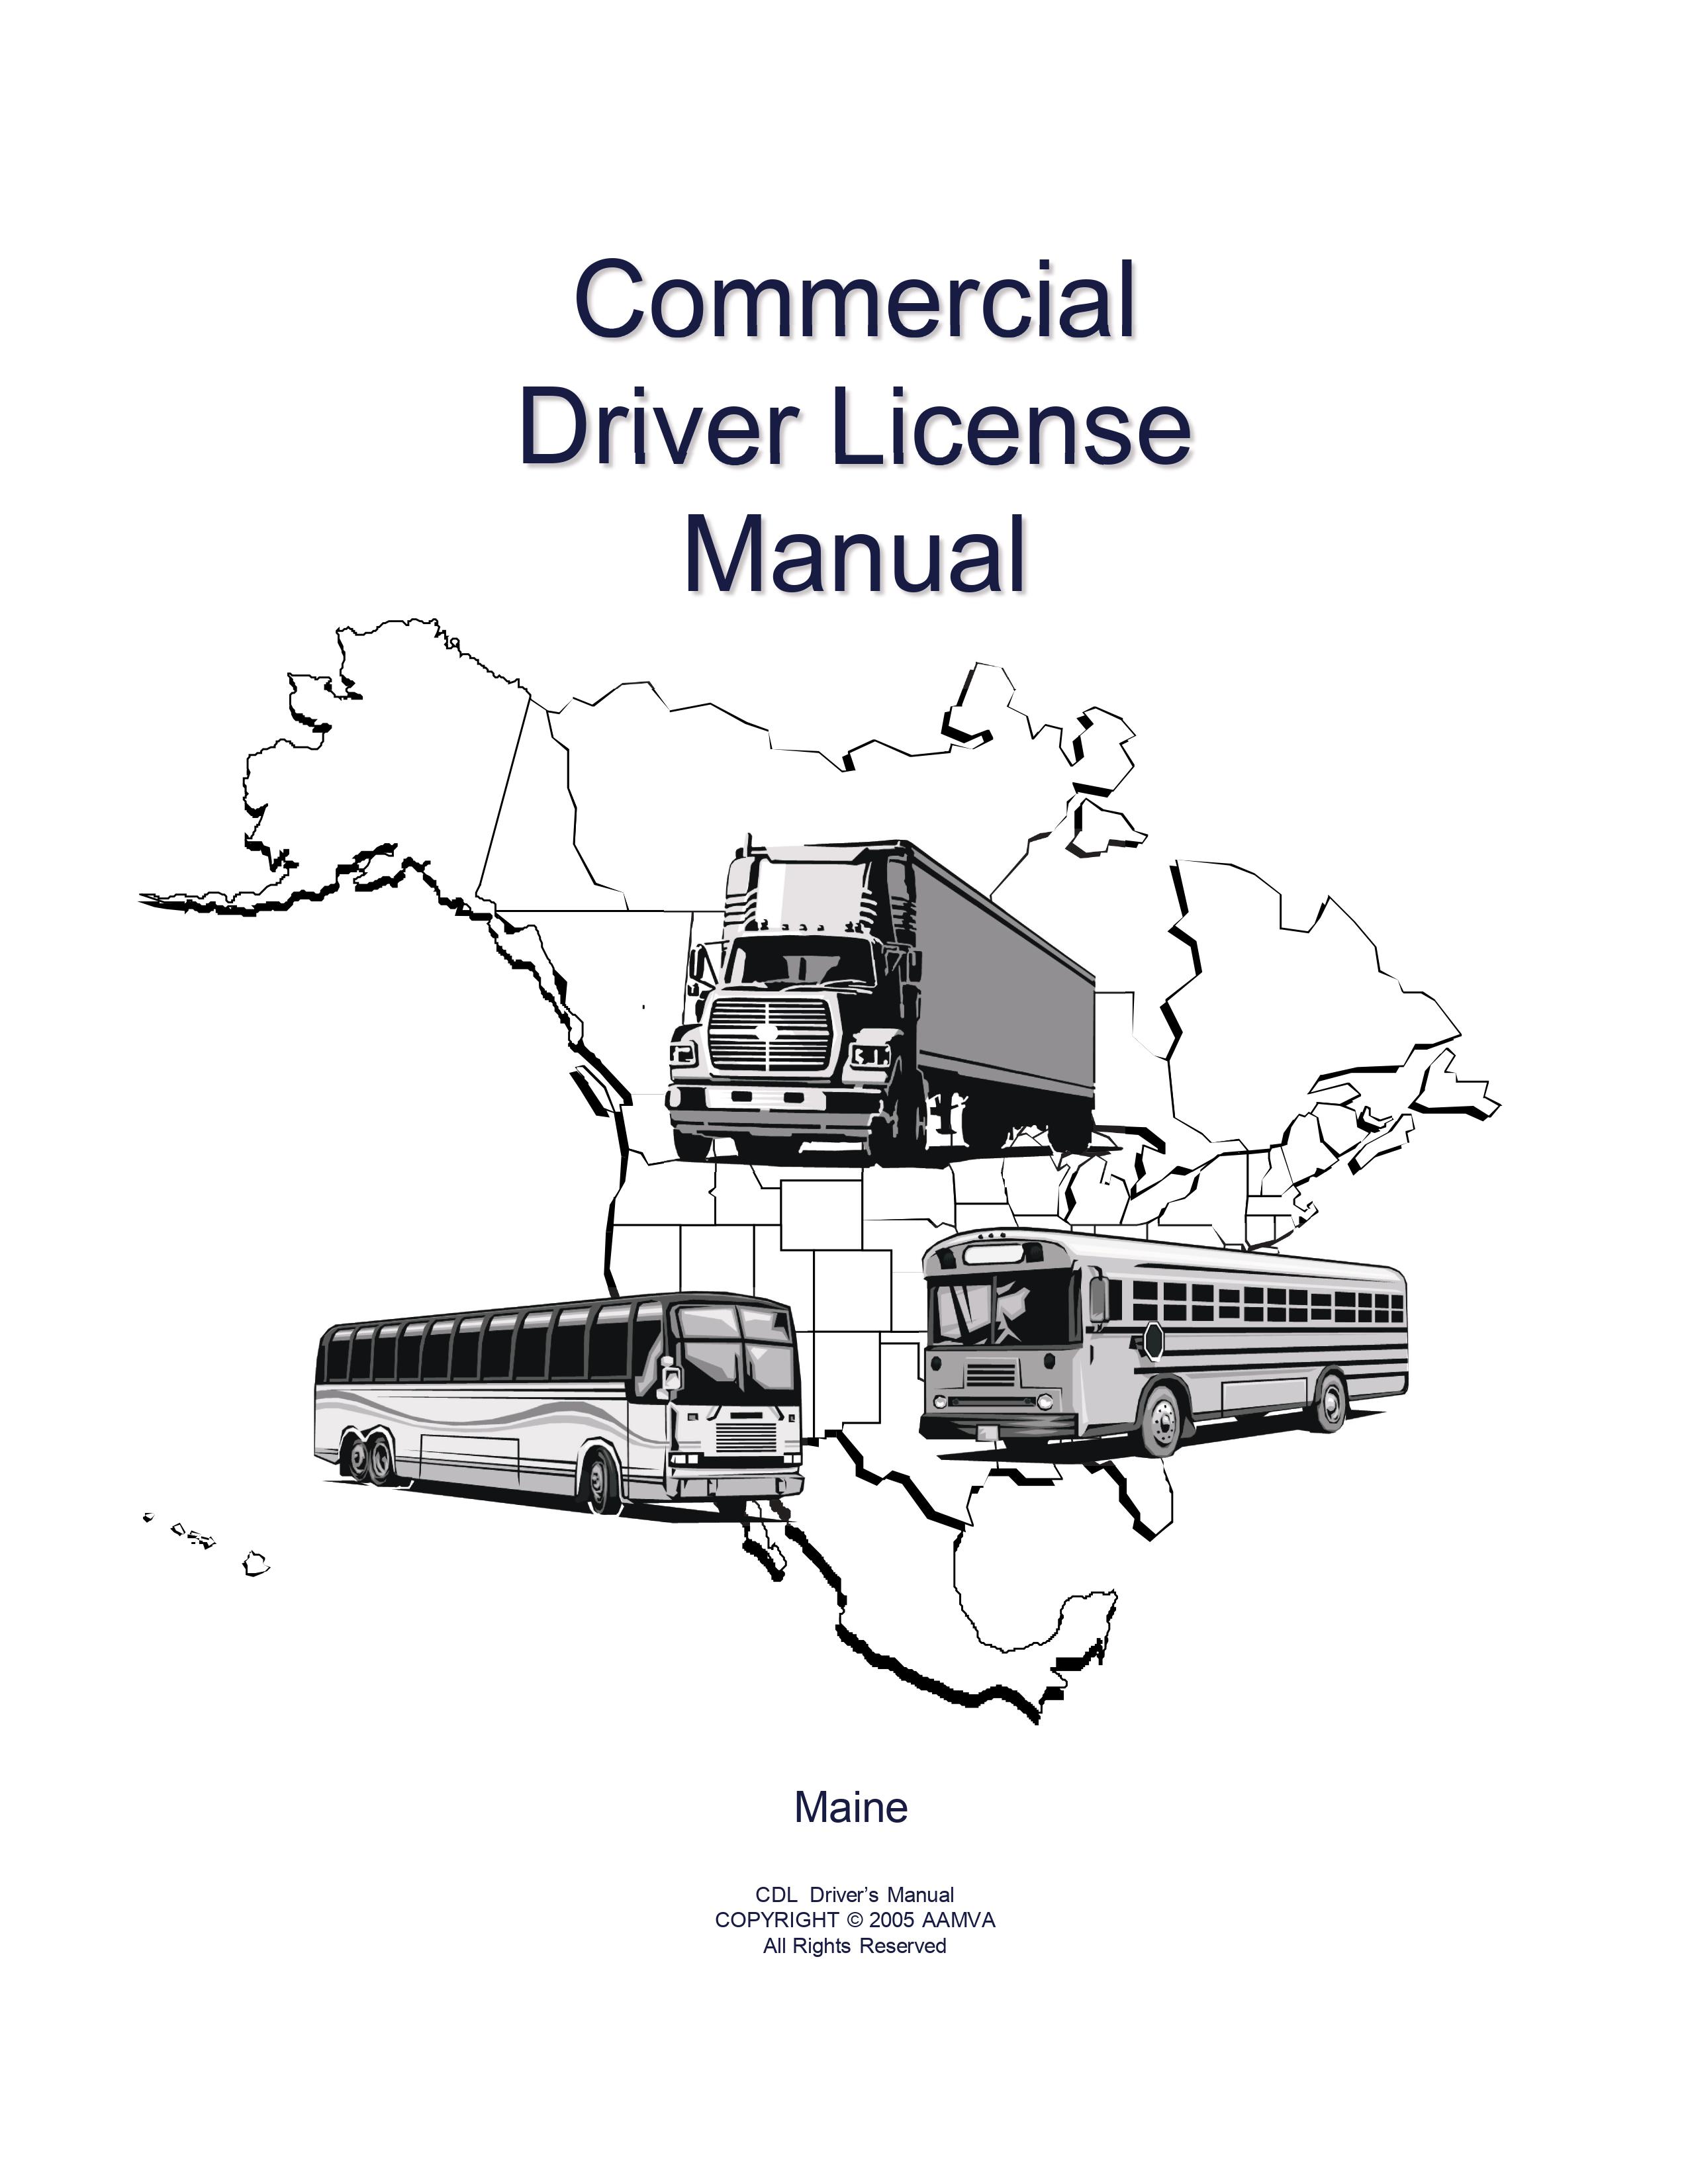 Maine's CDL Manual